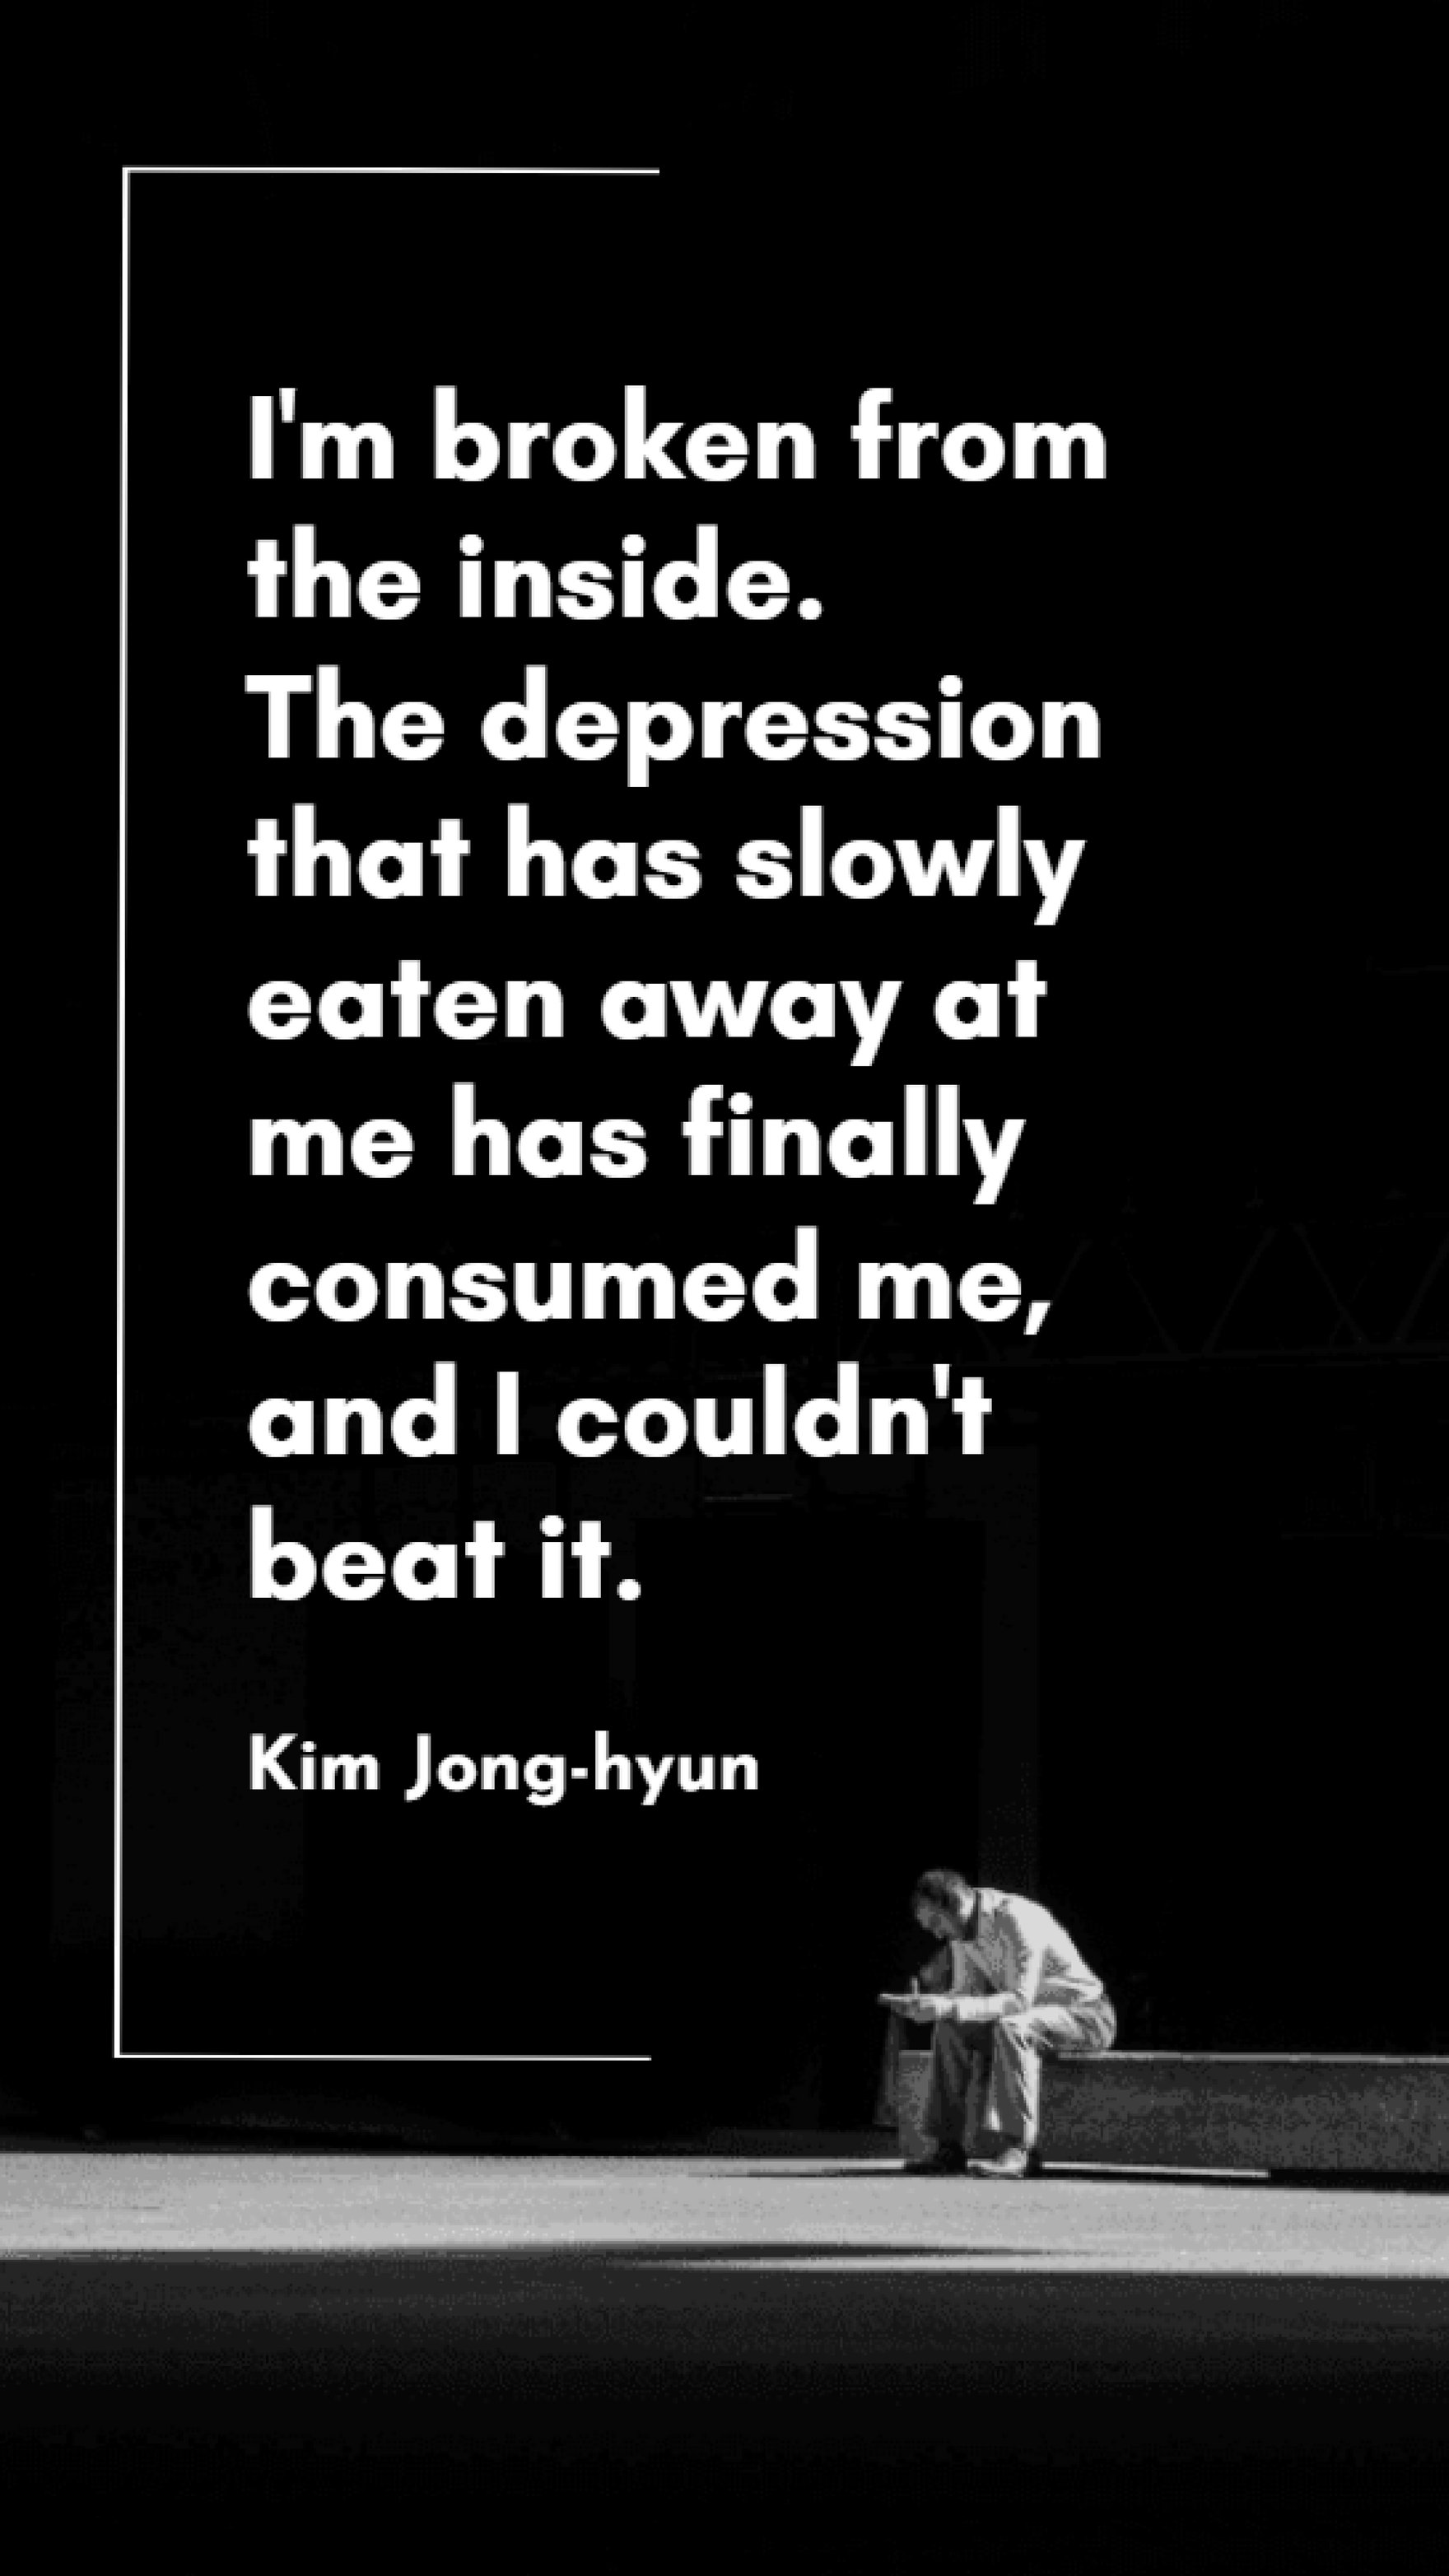 Kim Jong-hyun - I'm broken from the inside. The depression that has slowly eaten away at me has finally consumed me, and I couldn't beat it. Template